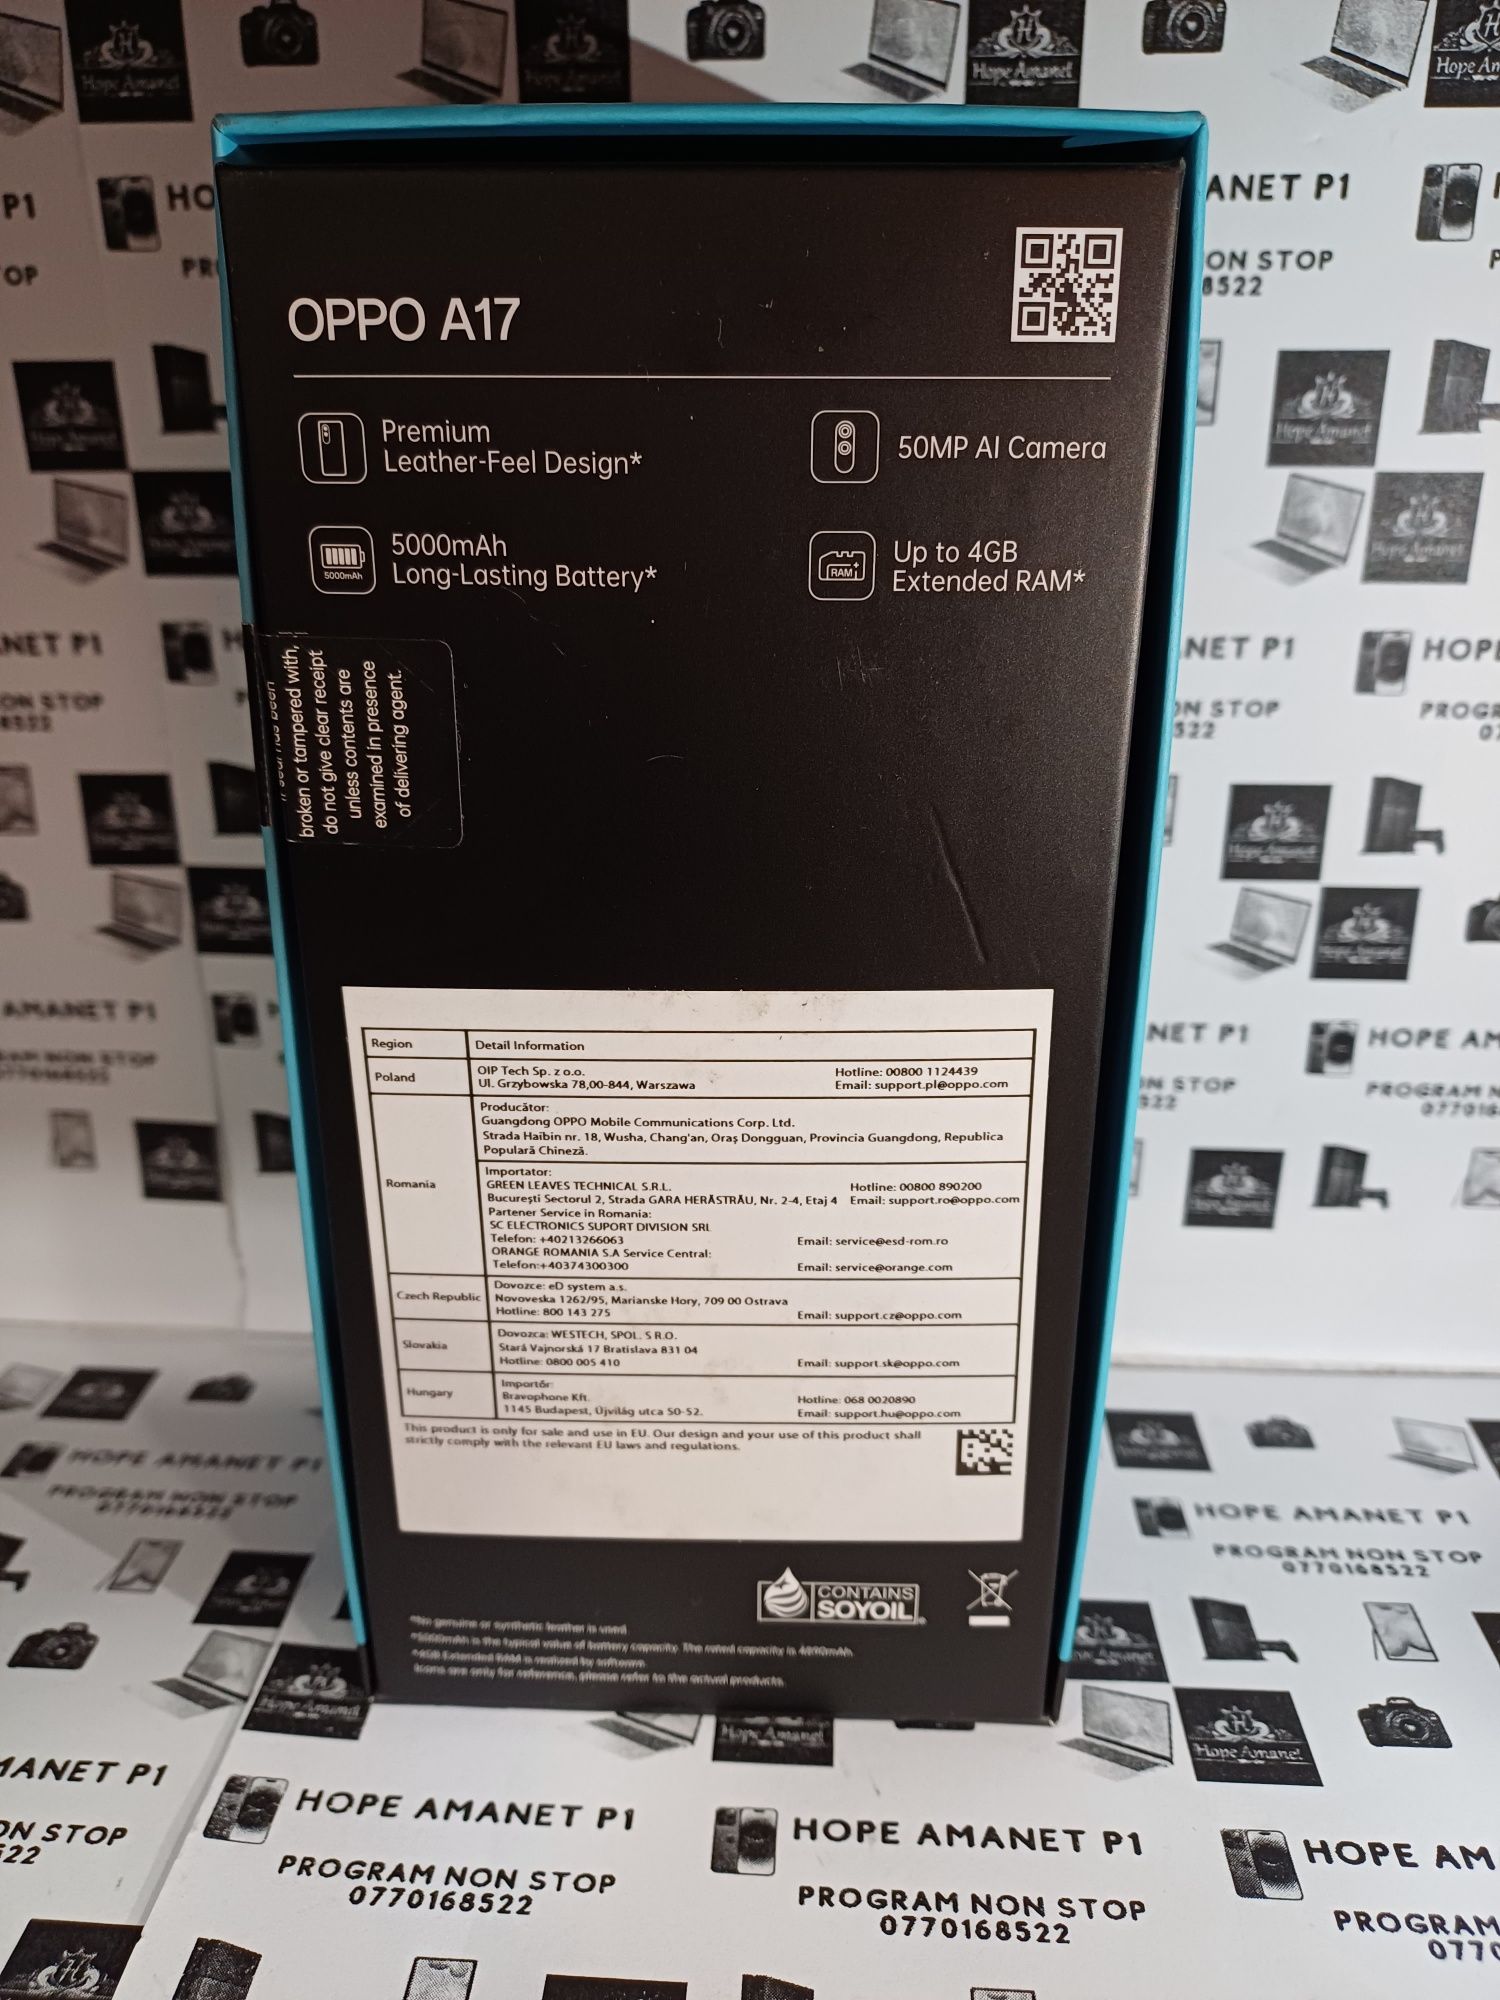 Hope Amanet P1/OPPO A17